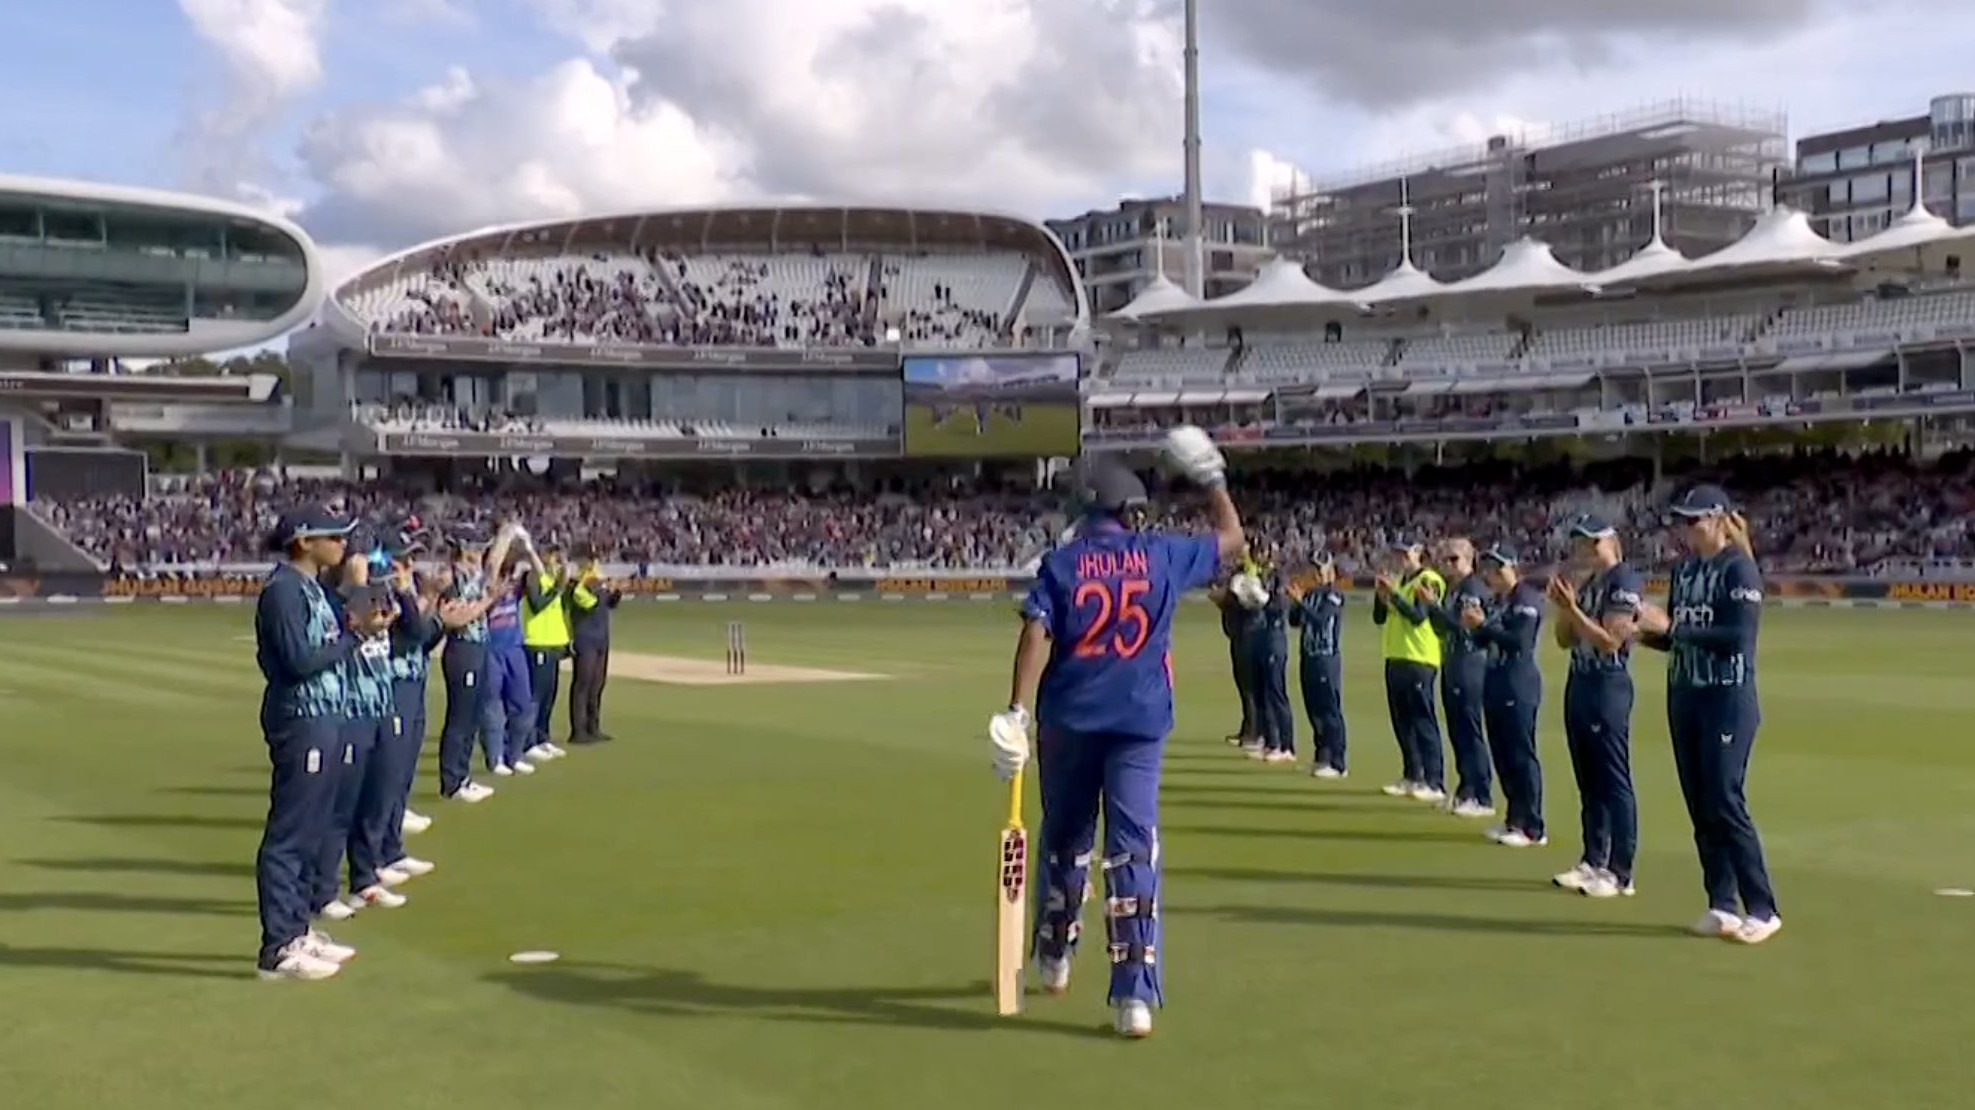 WATCH: Jhulan Goswami receives 'guard of honour' from England players in her farewell match